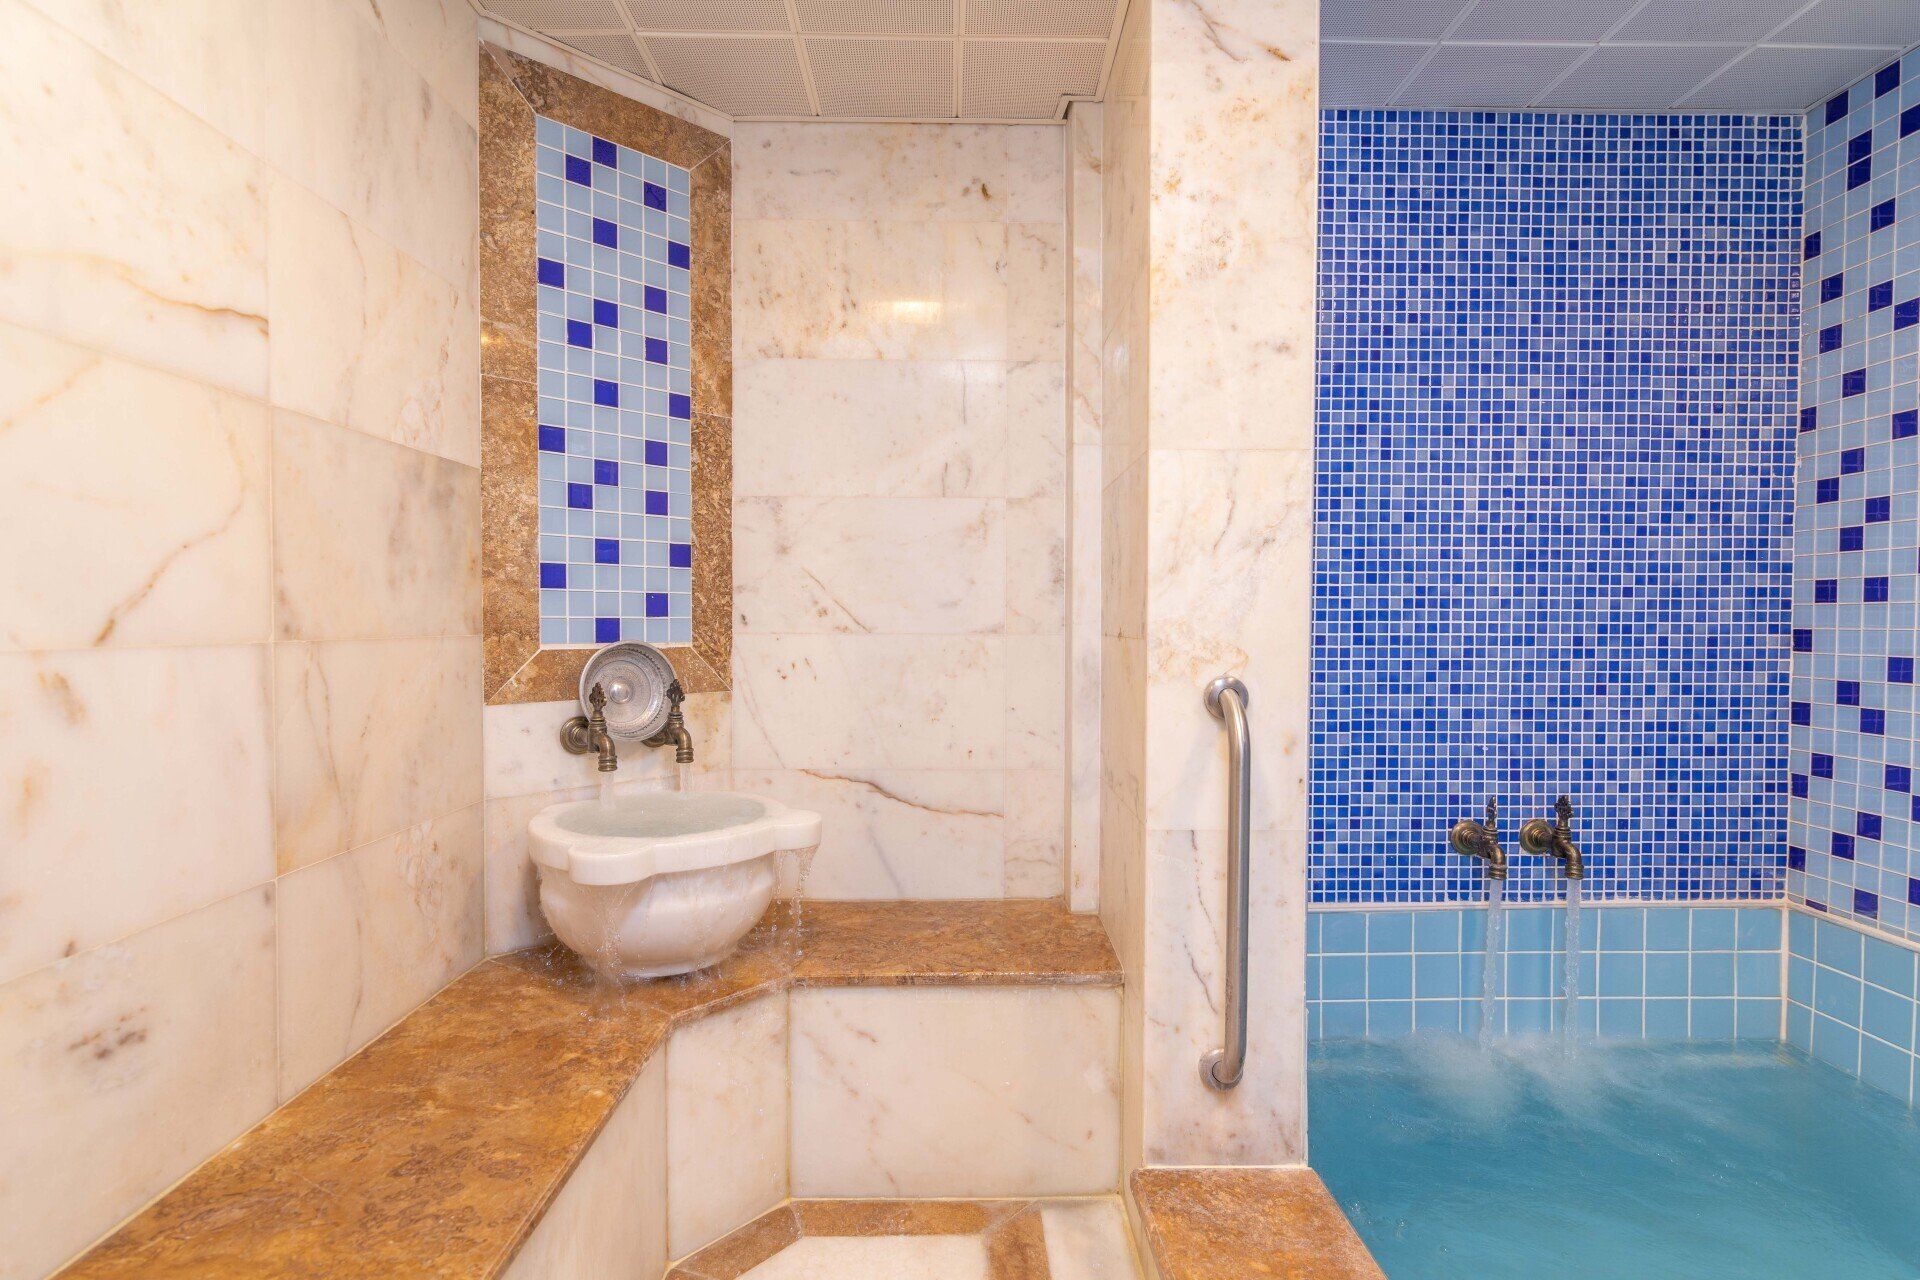 Aforia Thermal Otel, Special Hammam on Rooms